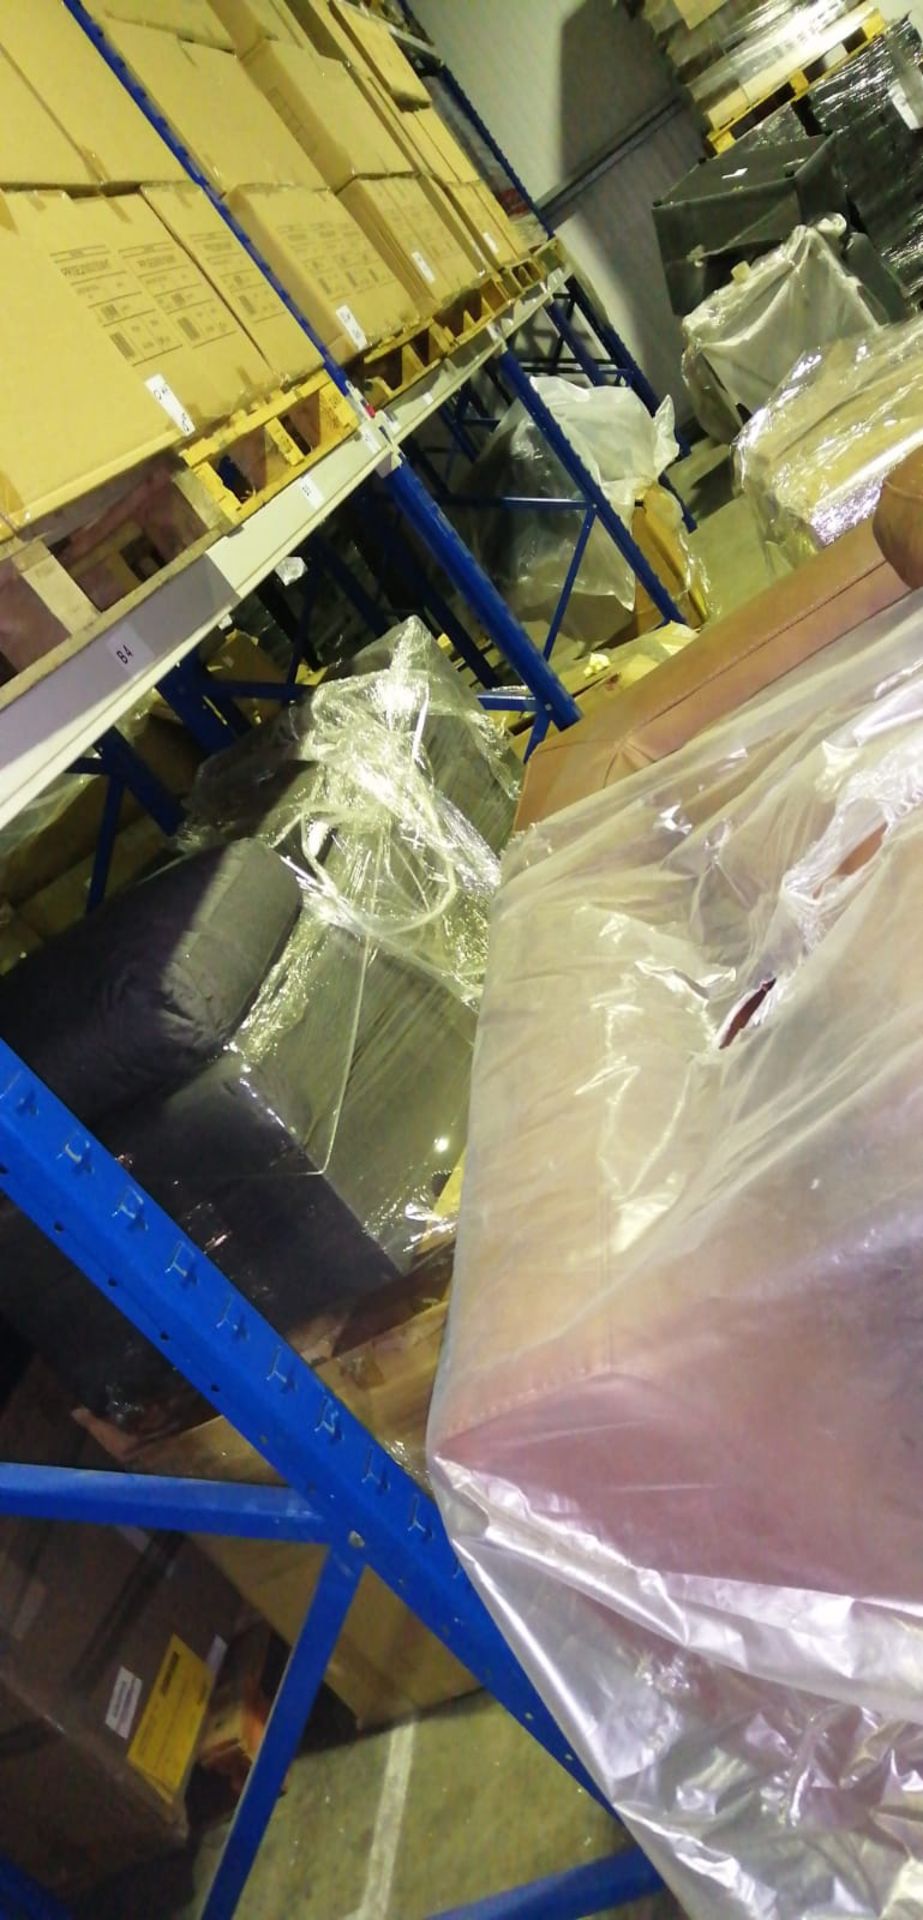 Approx 1-2 wagons of Customer returns Made.com Sofas and Sofa parts as manifested in the pictures, - Image 10 of 10